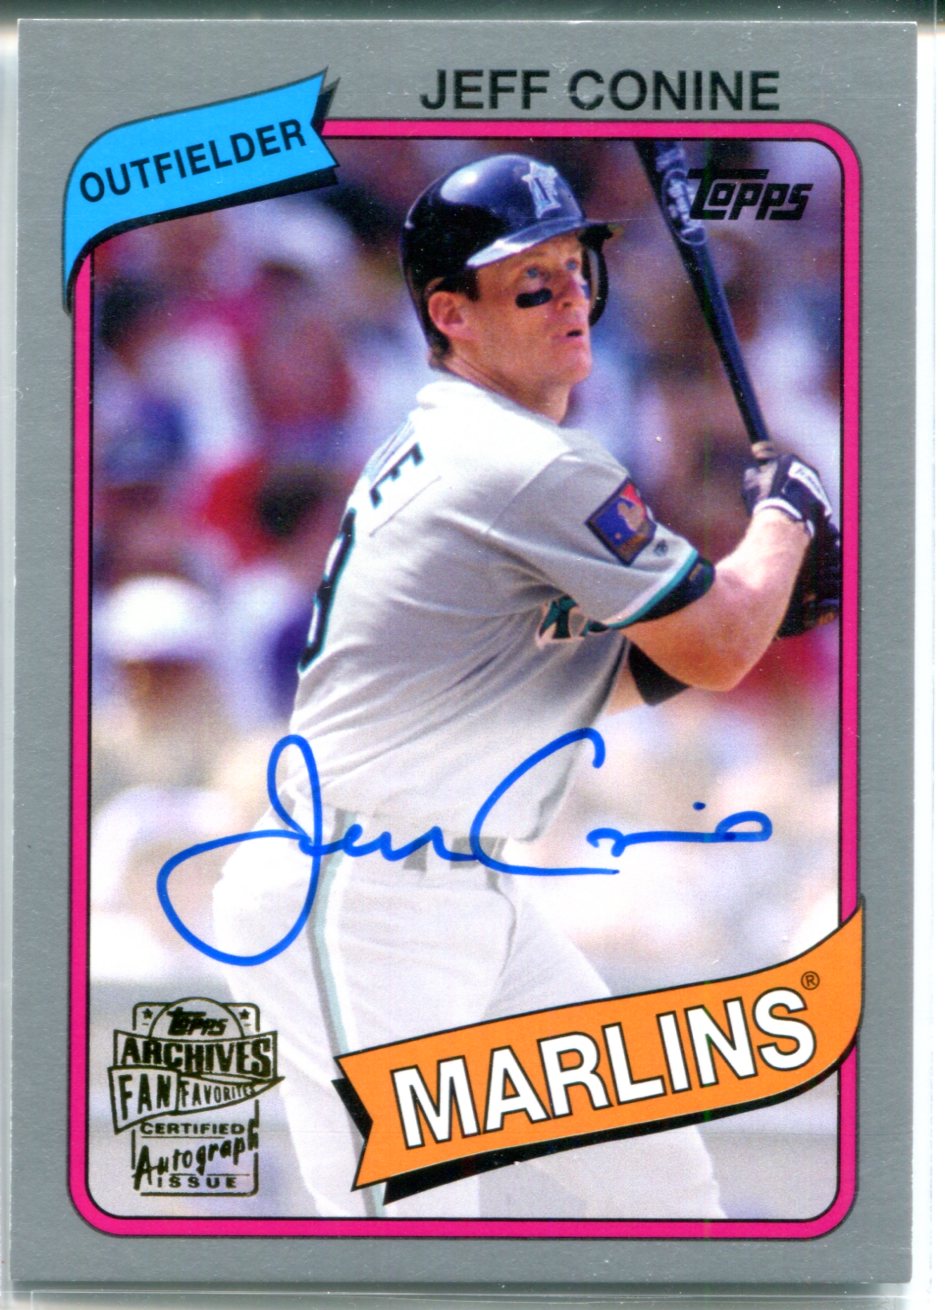 Jeff Conine Autographed Topps Card #6/199